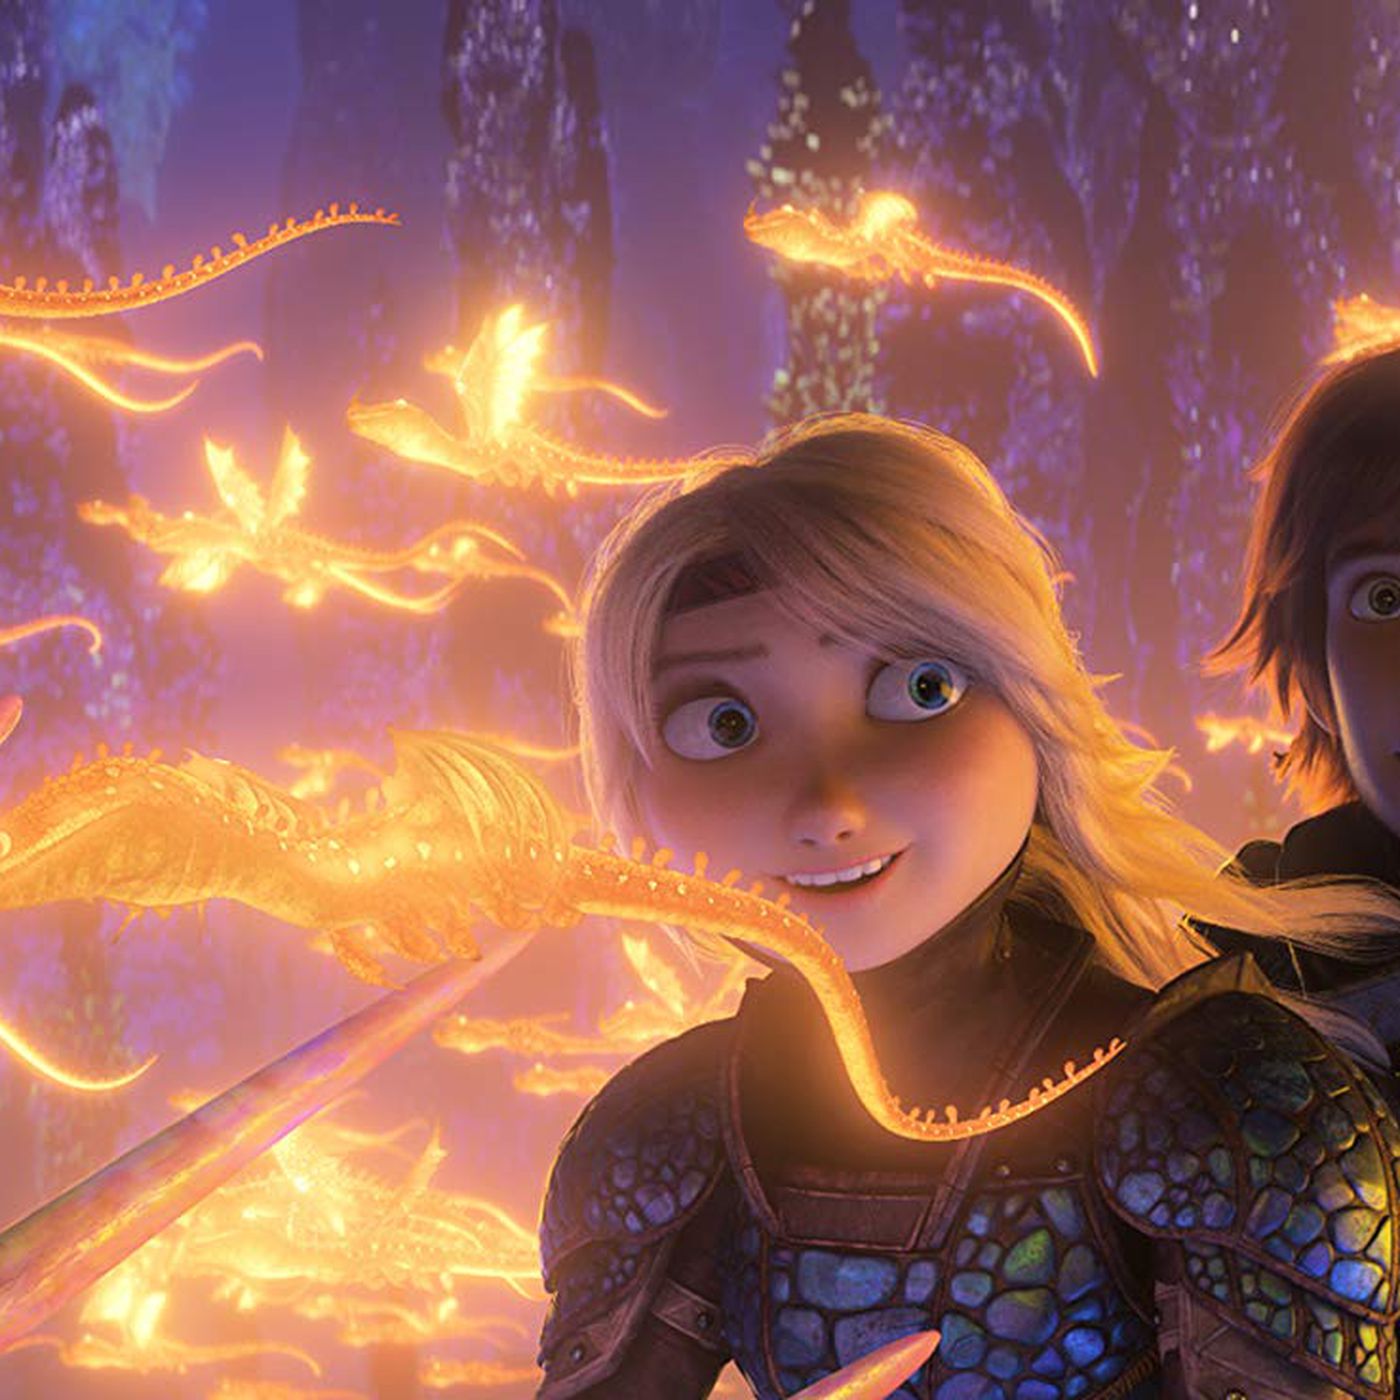 How To Train Your Dragon 3 Review A Simple Movie With A Complex